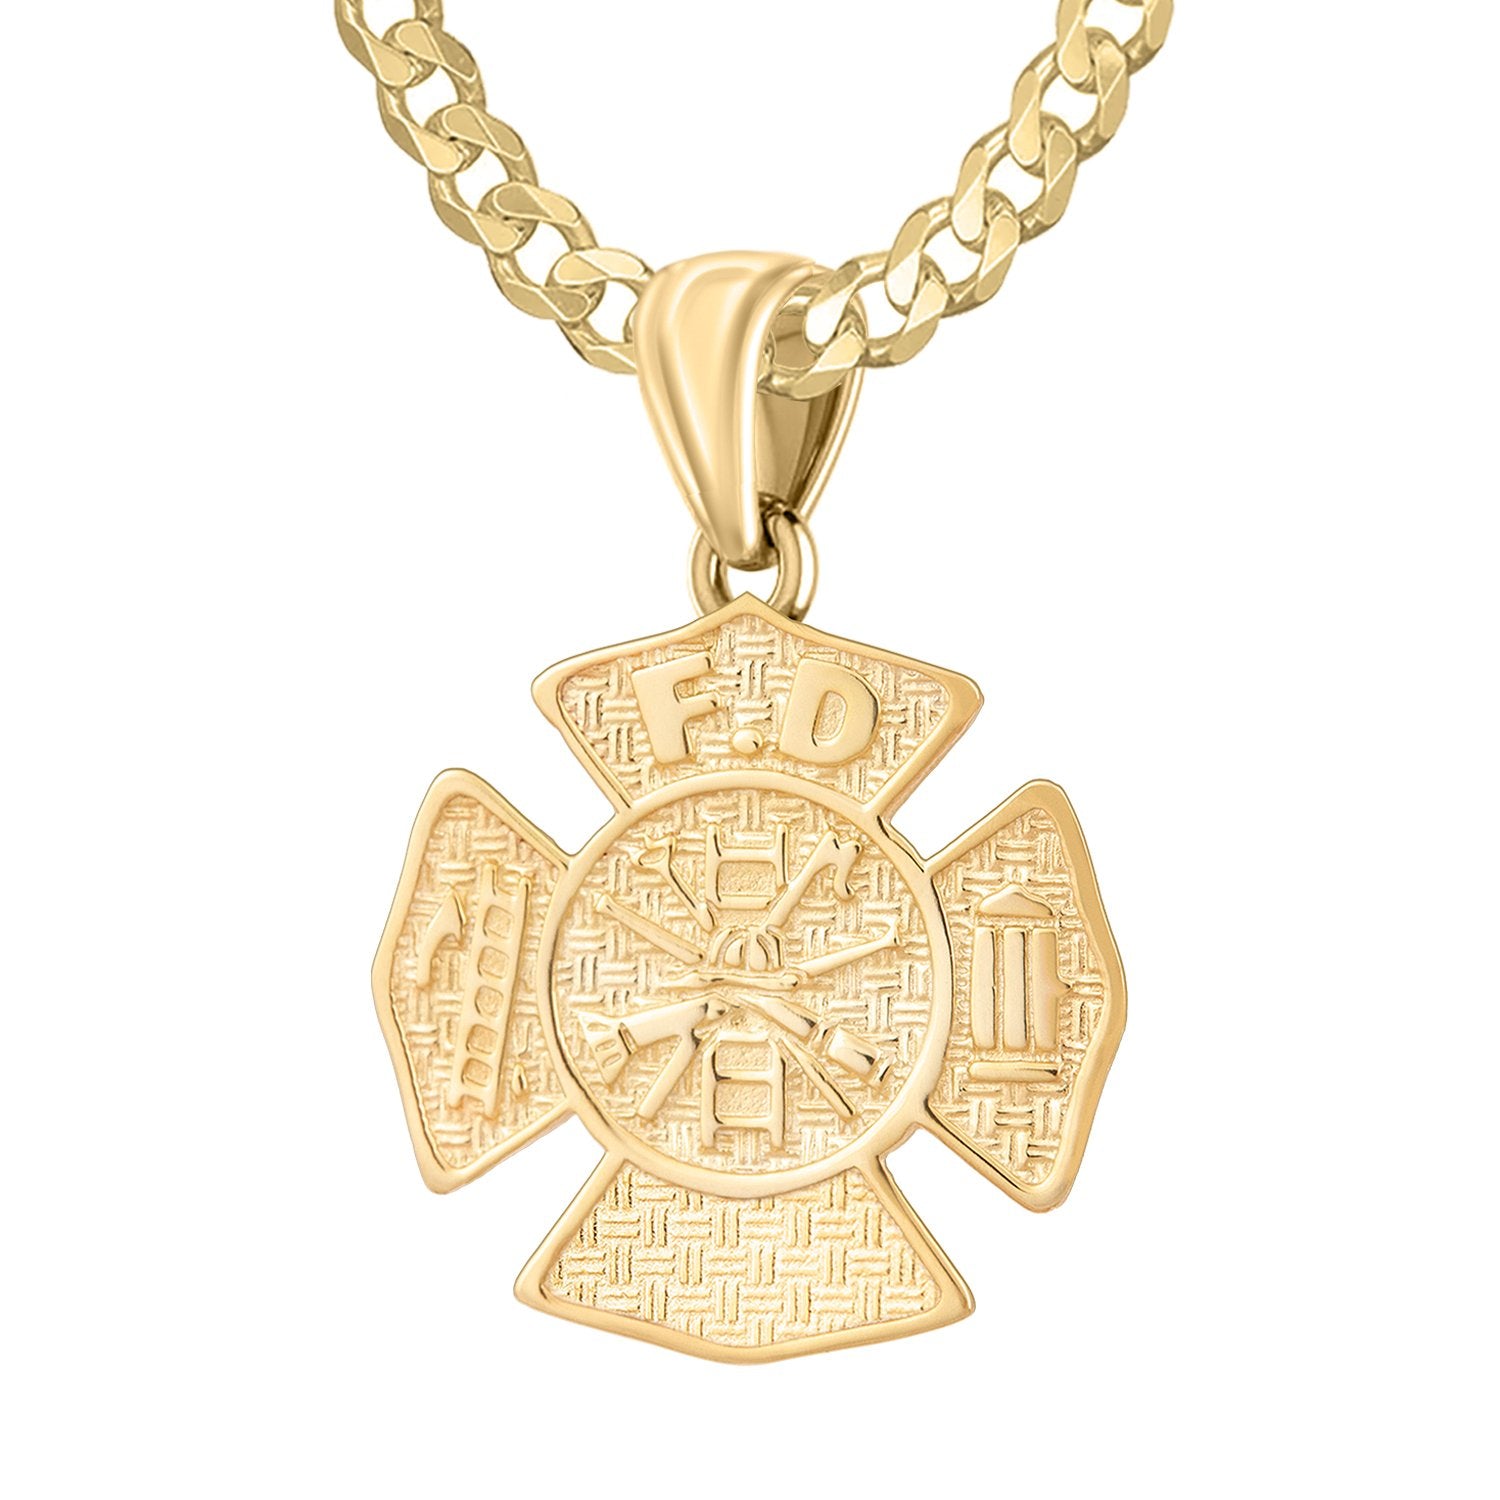 Firefighter Necklace of 26mm in 14k Gold - 3.6mm Curb Chain